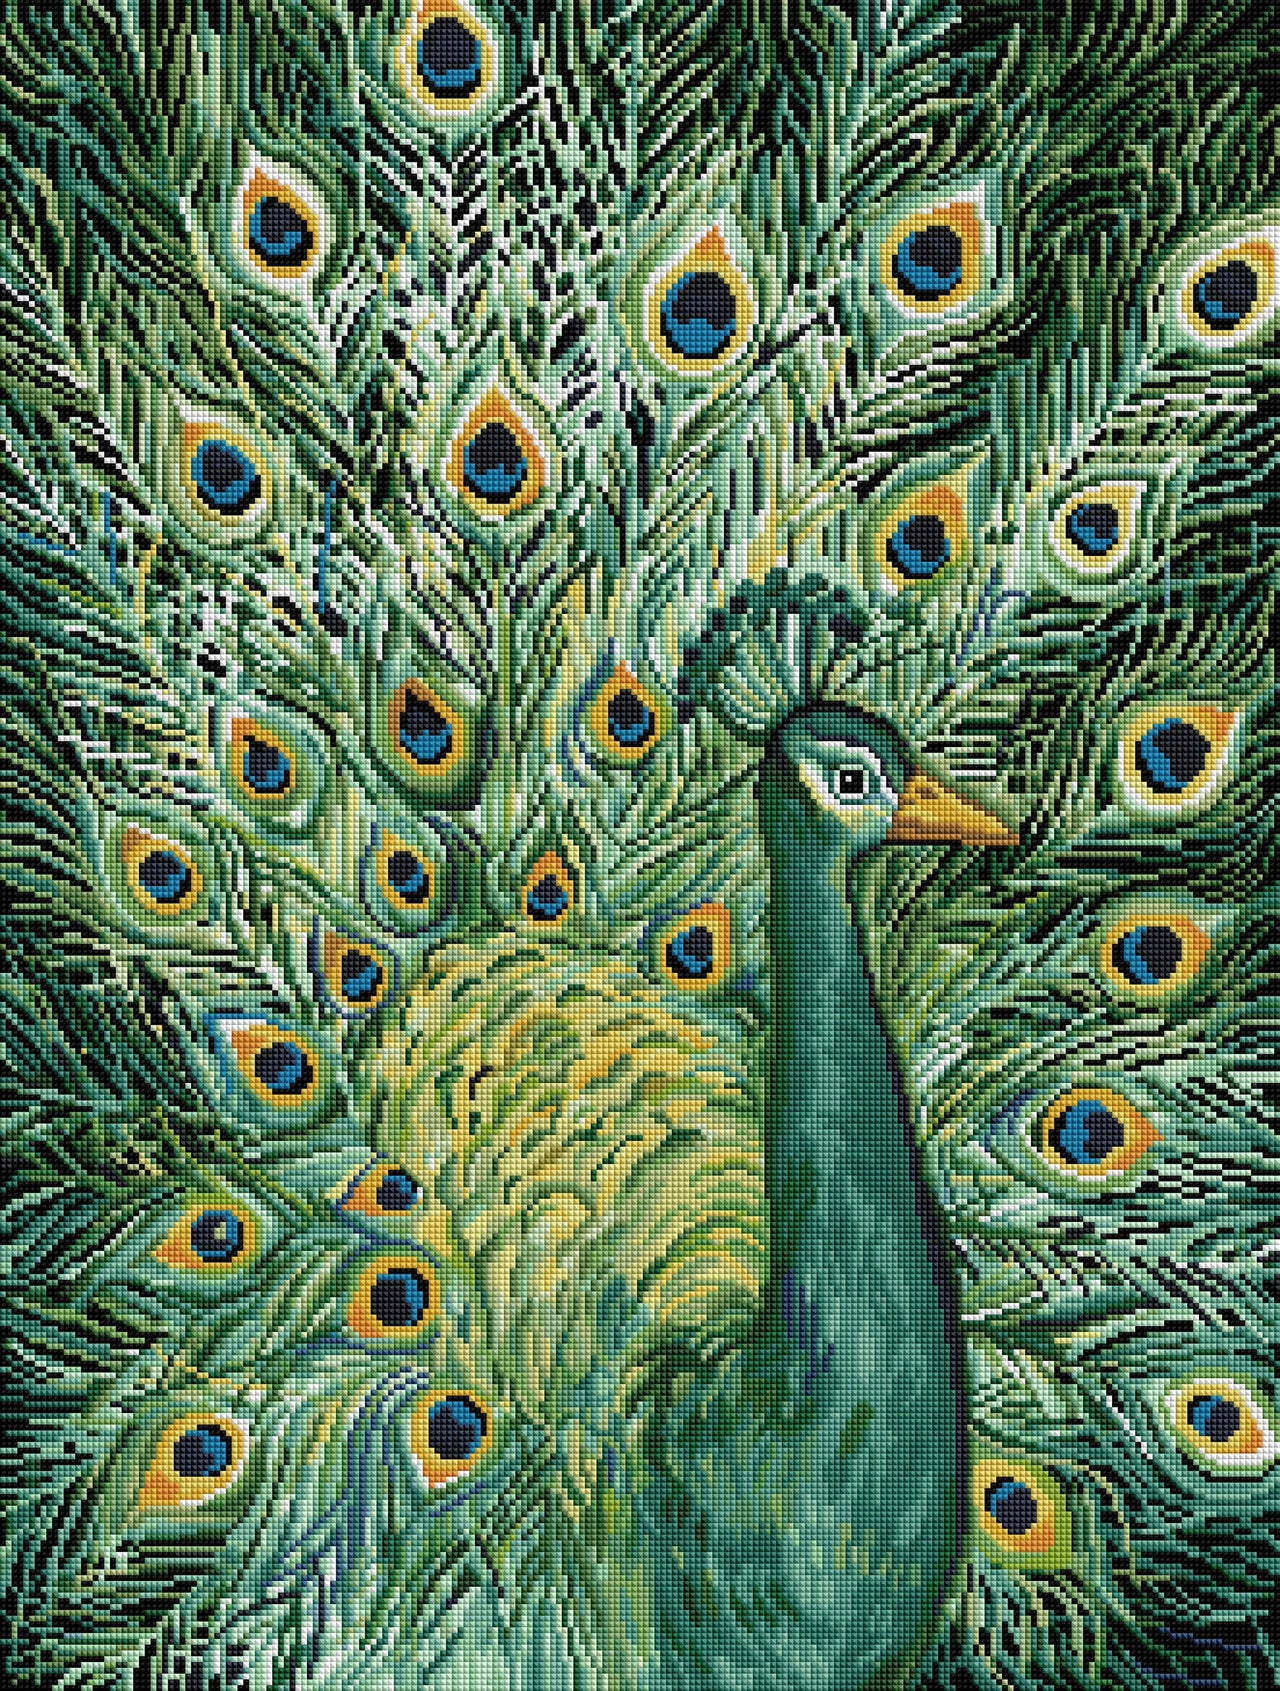 Diamond Painting Peacock 22" x 29″ (56cm x 74cm) / Square with 38 Colors including 2 ABs / 64,531